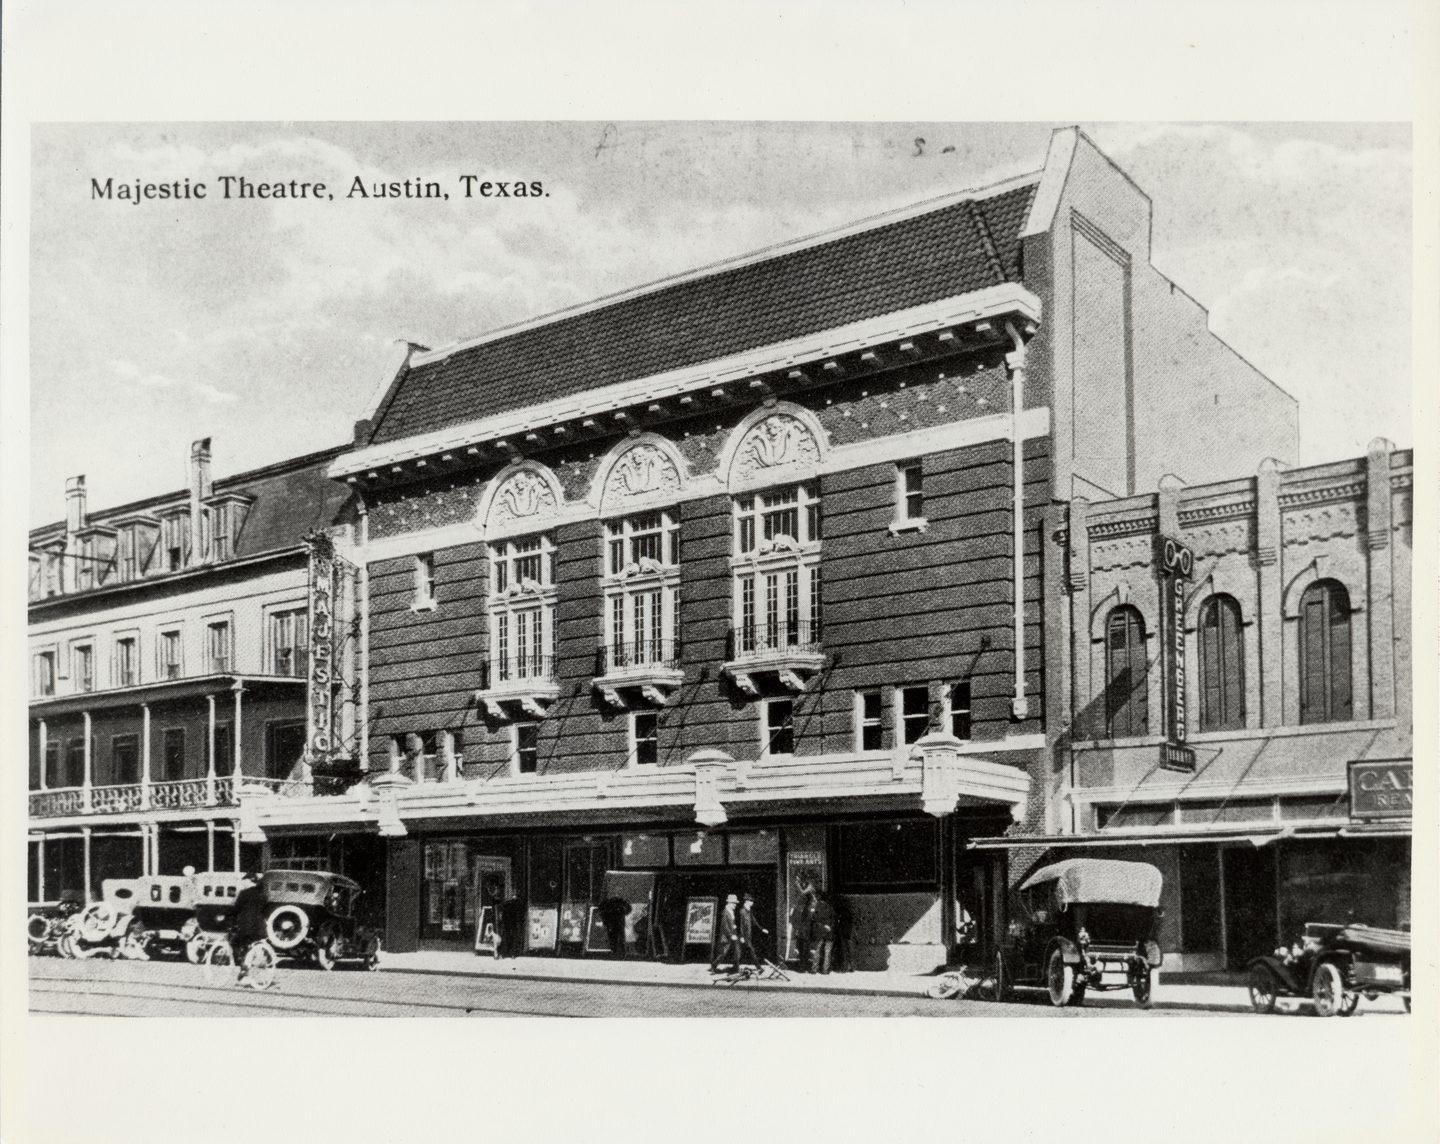 The Majestic during the 1920s